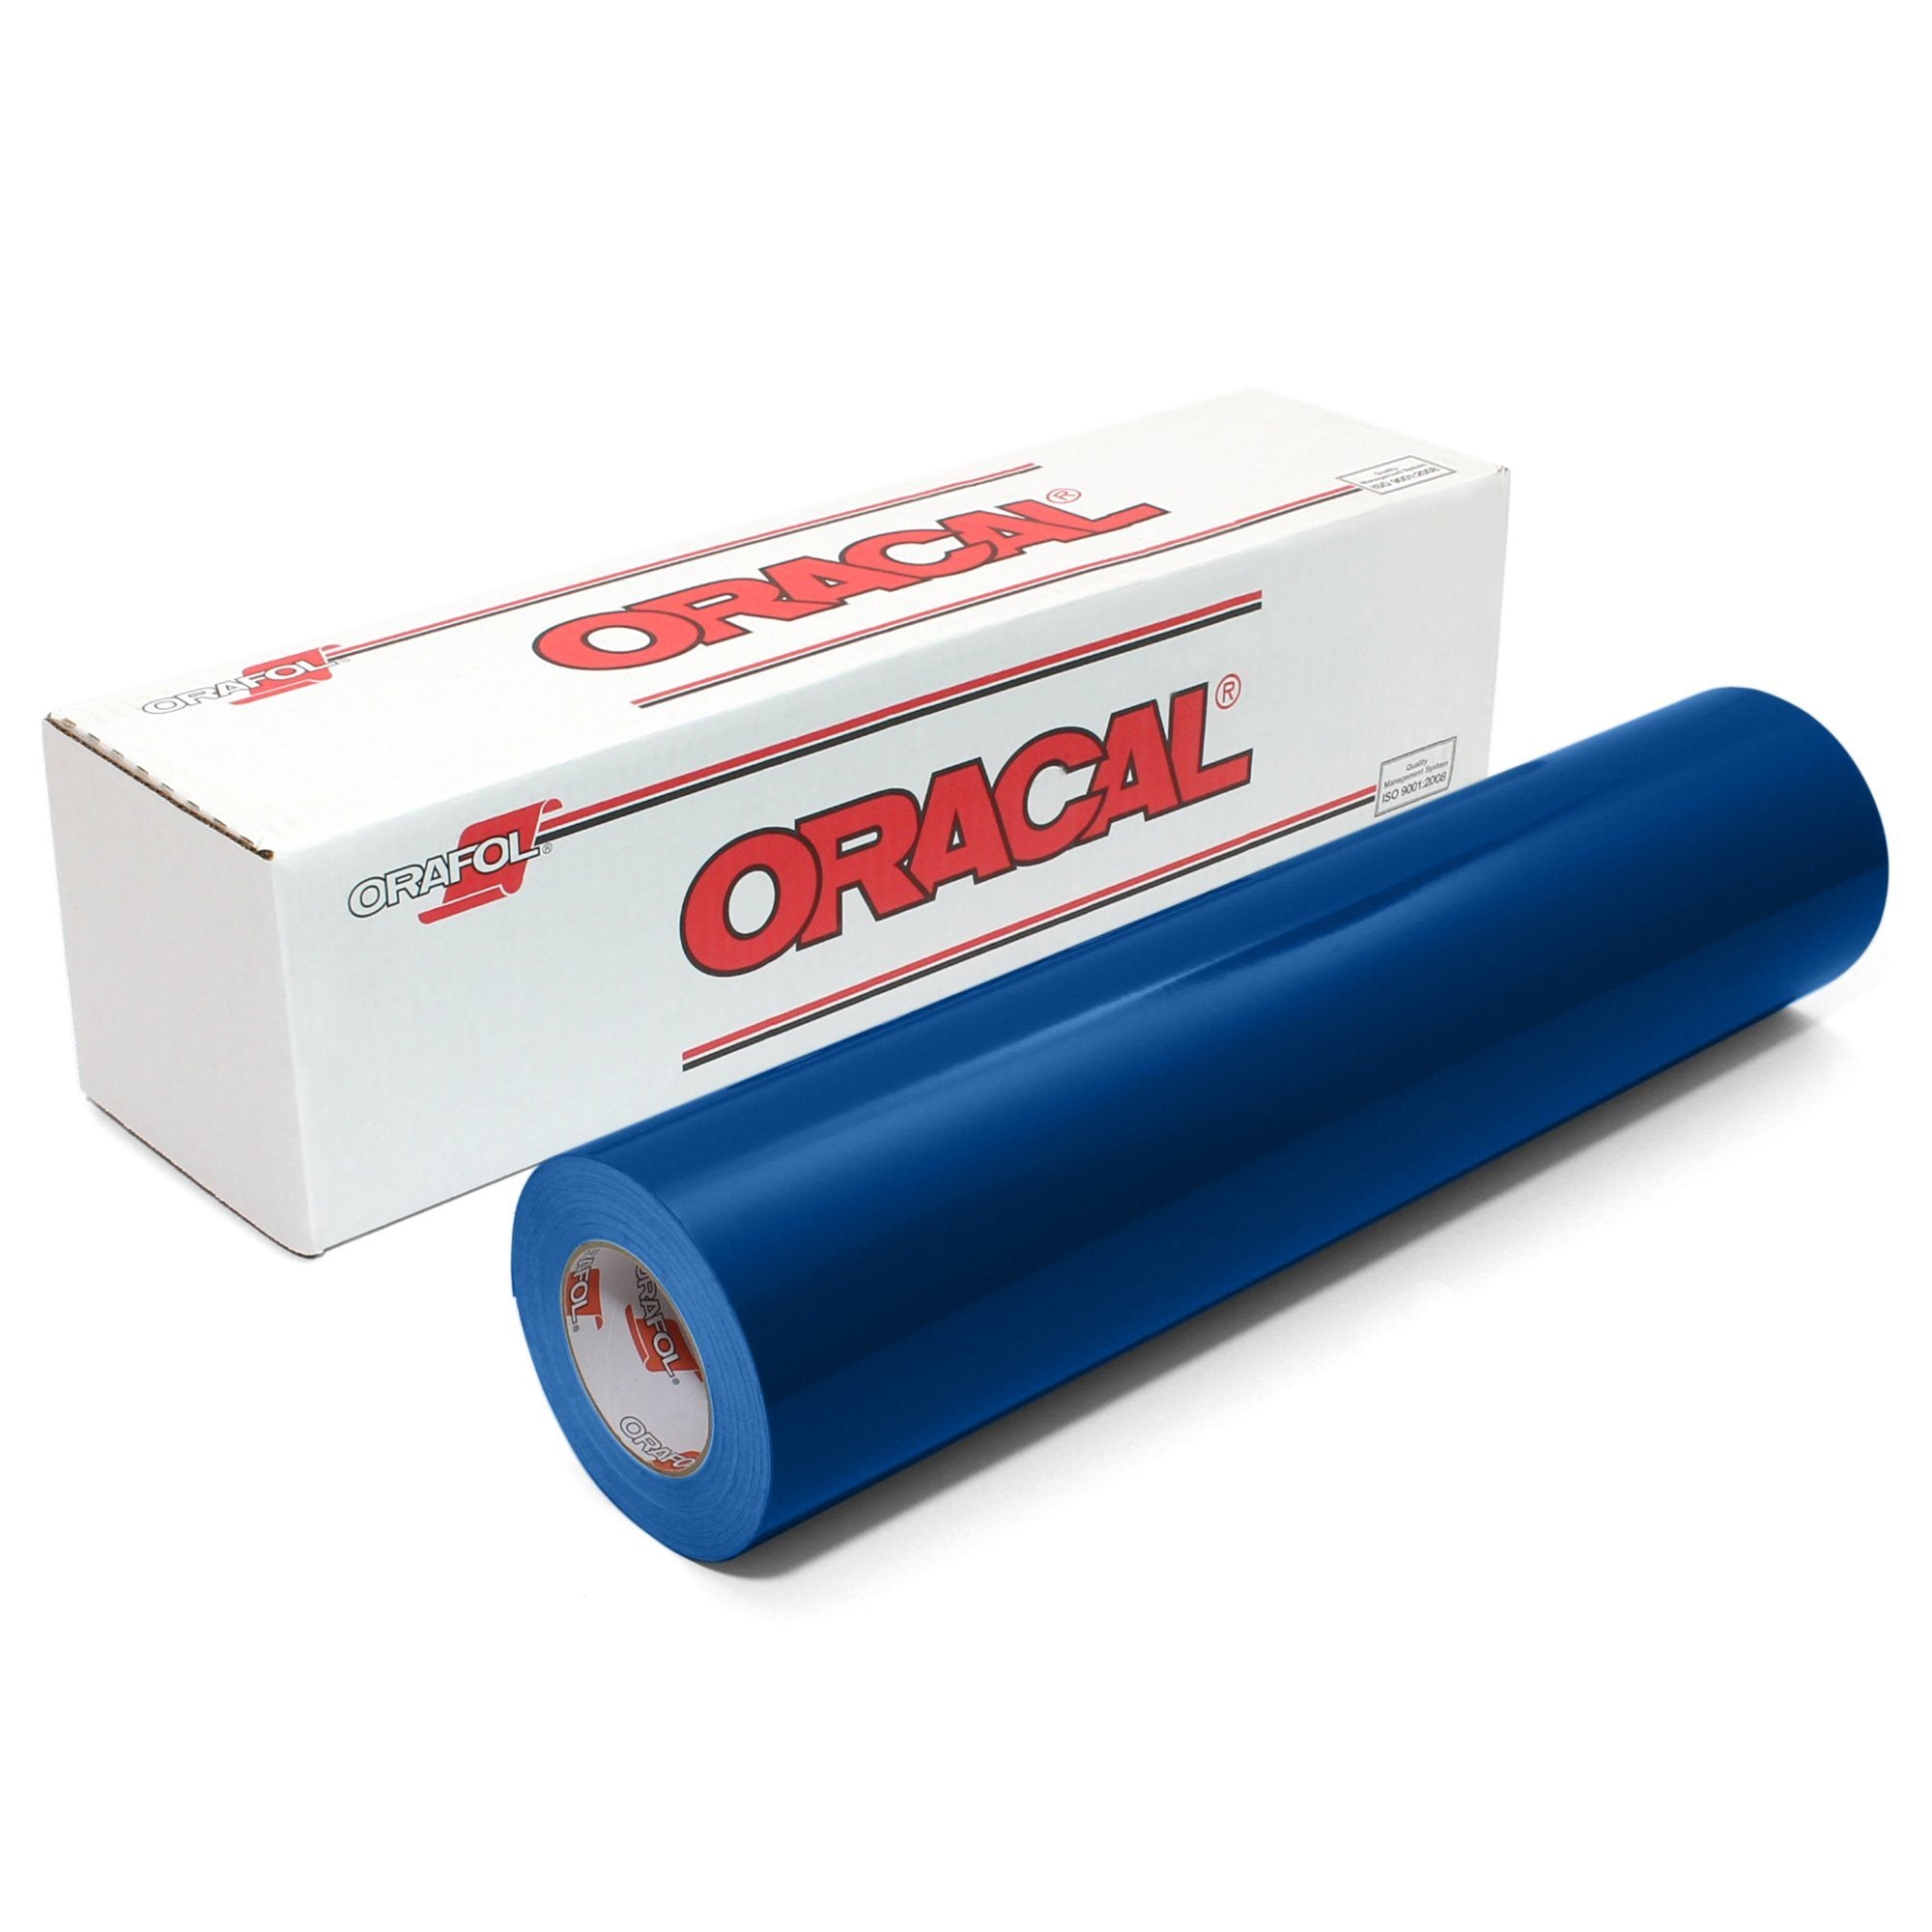 Oracal 651 12 x 60 (5 FT) (colors)-O6515FTC